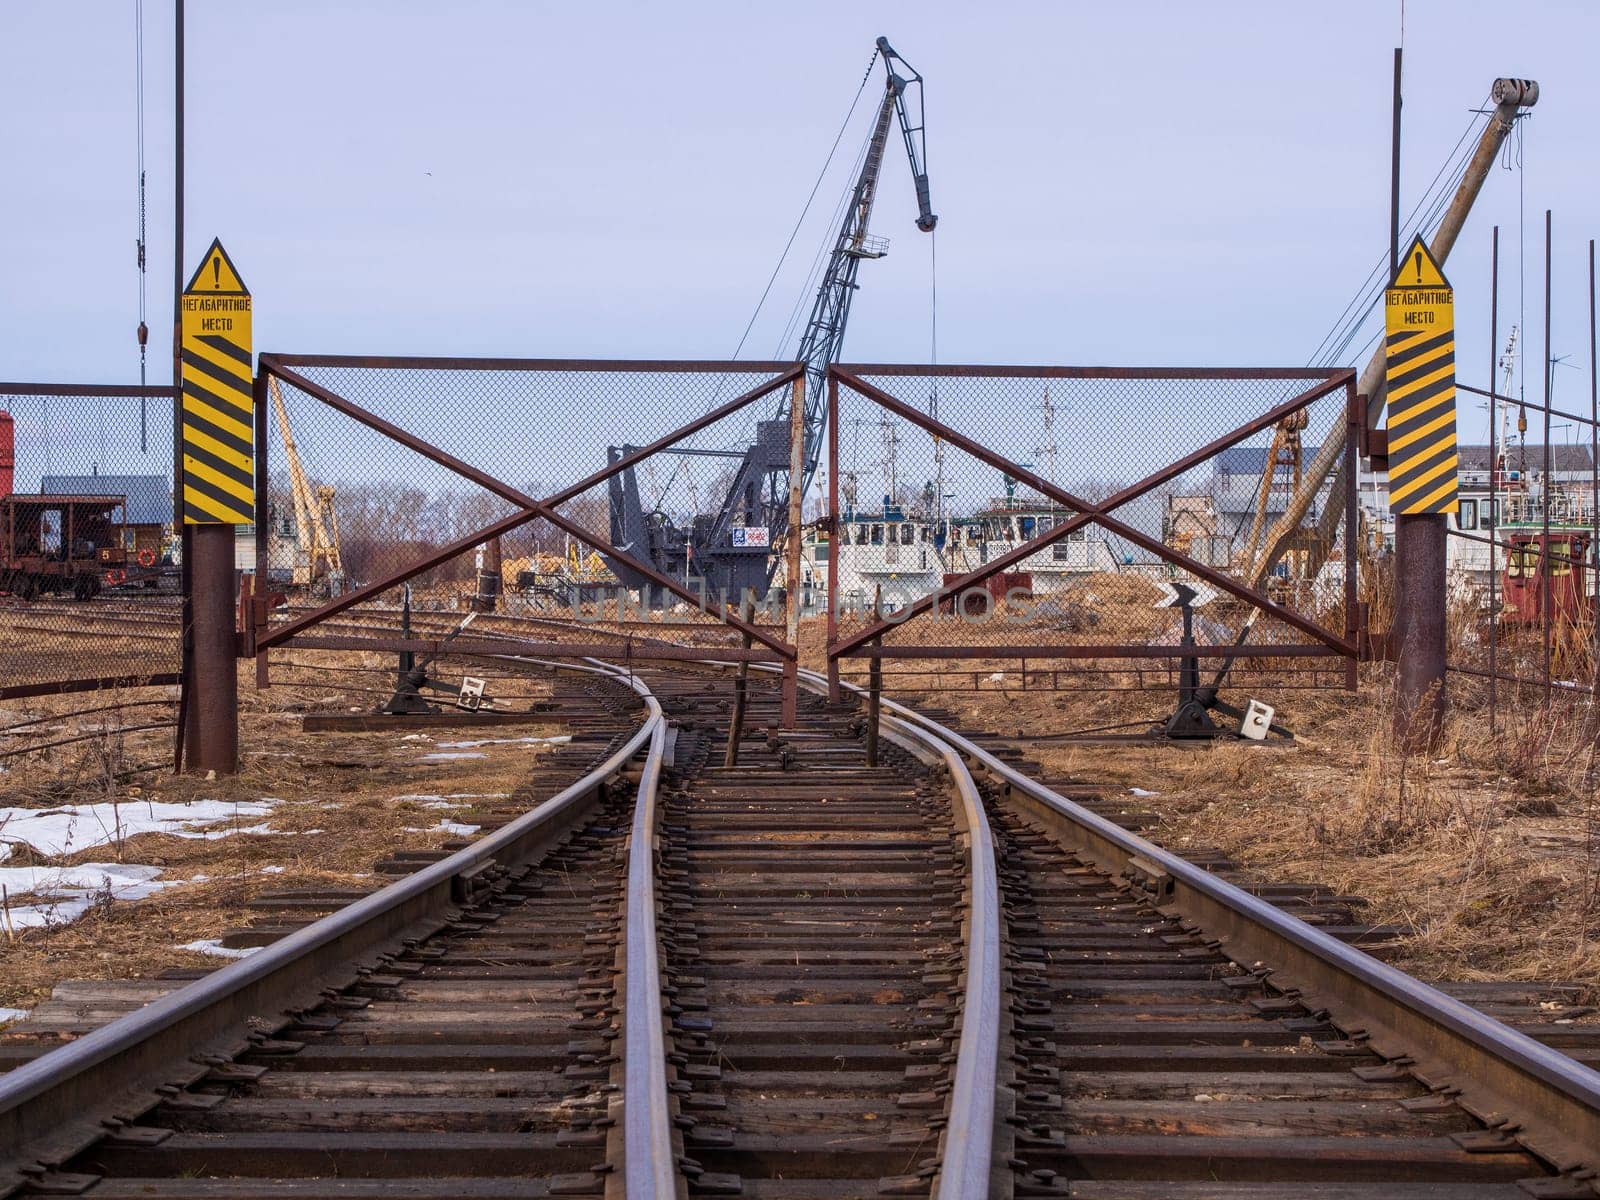 Rail road tracks under the gantry cranes on the berth of sea merchant port by Andre1ns